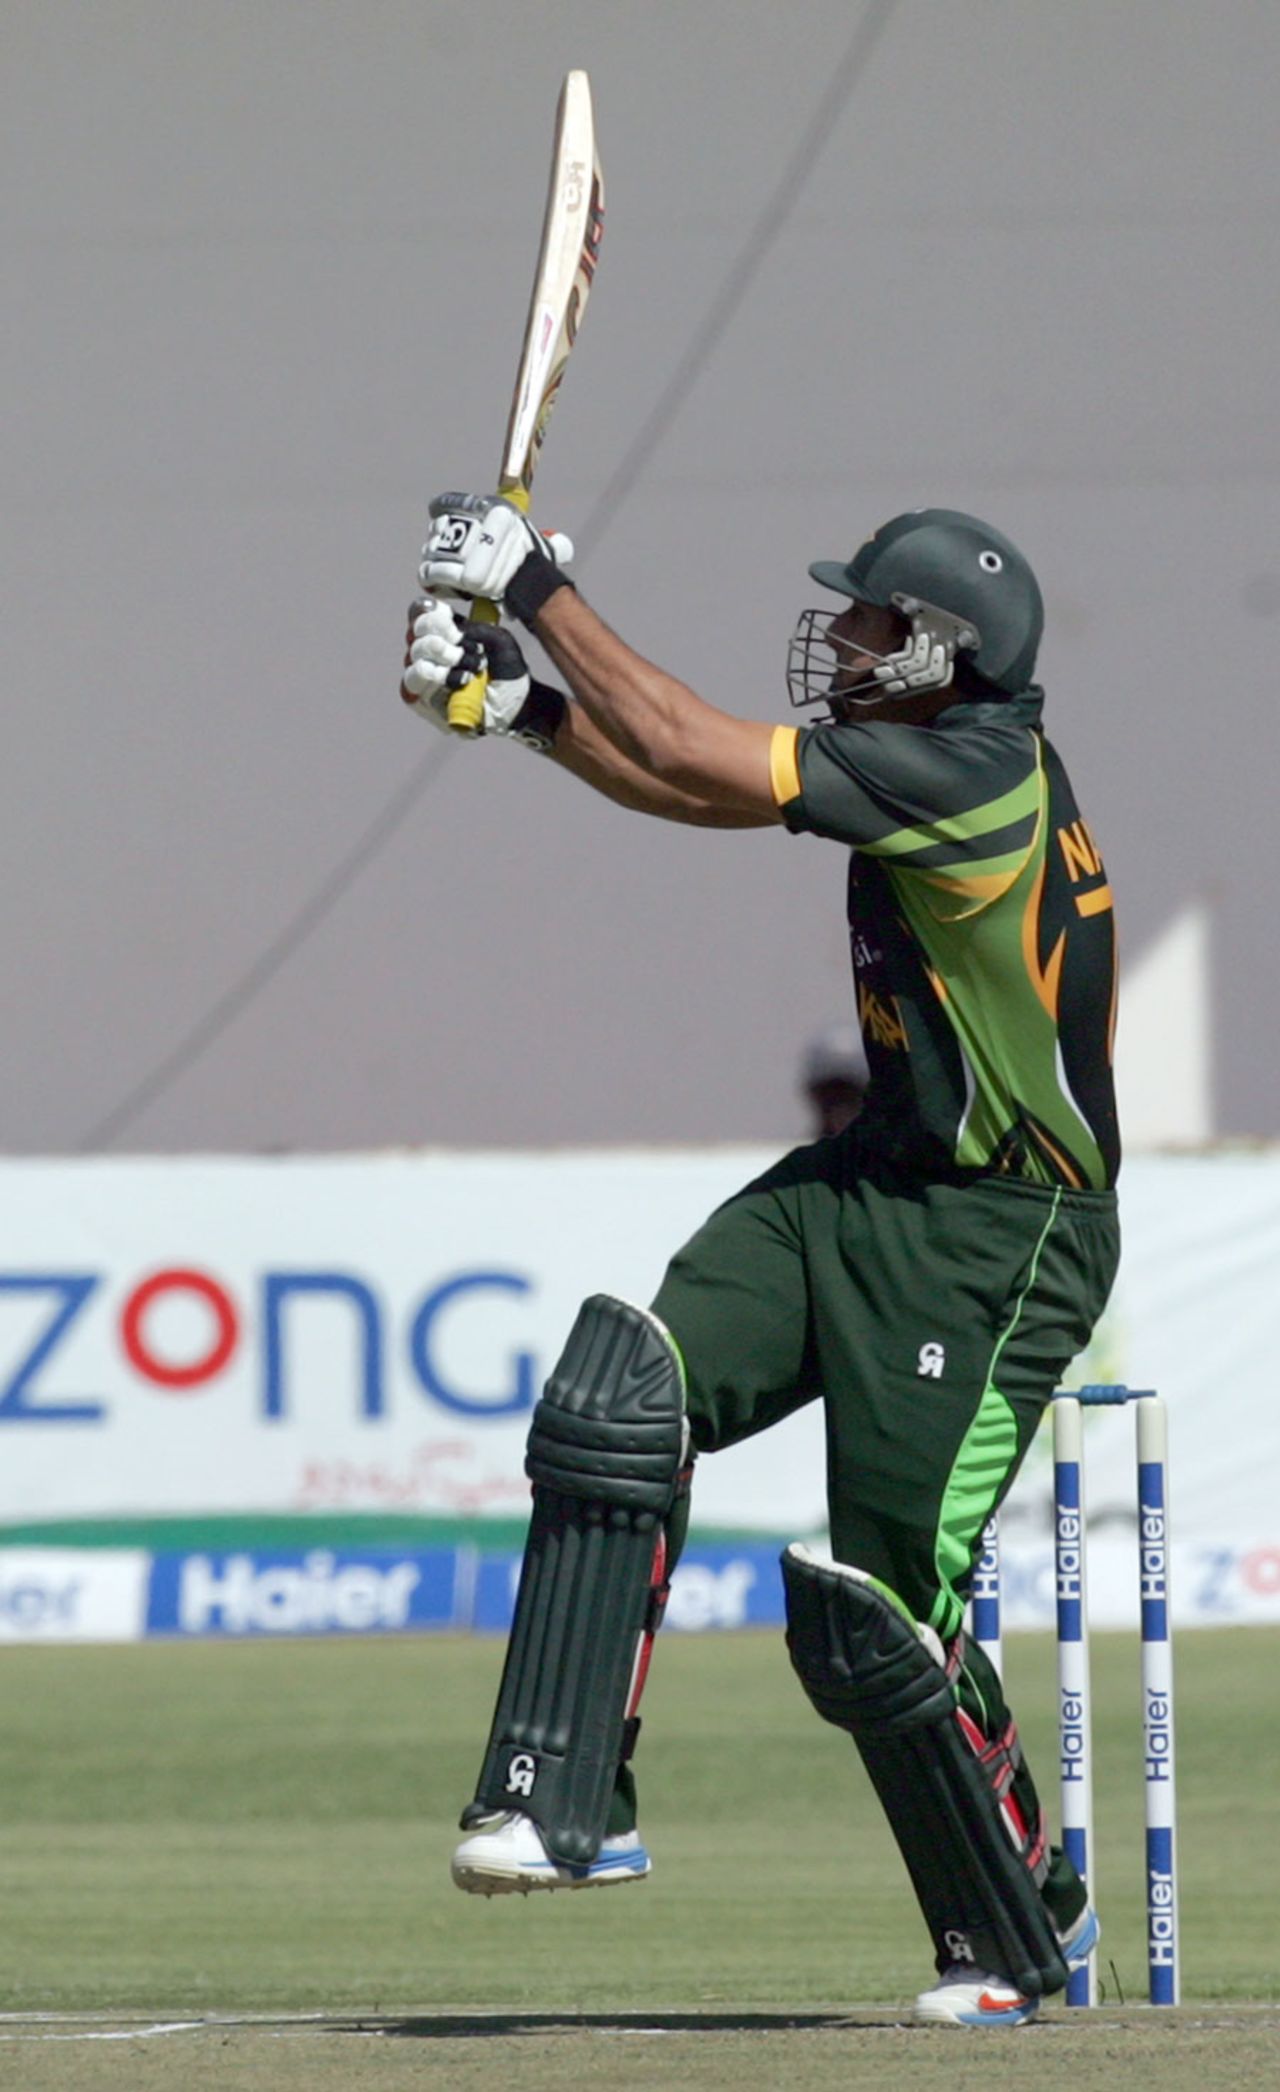 Nasir Jamshed pulls the ball, Zimbabwe v Pakistan, 2nd T20I, Harare, August 24, 2013